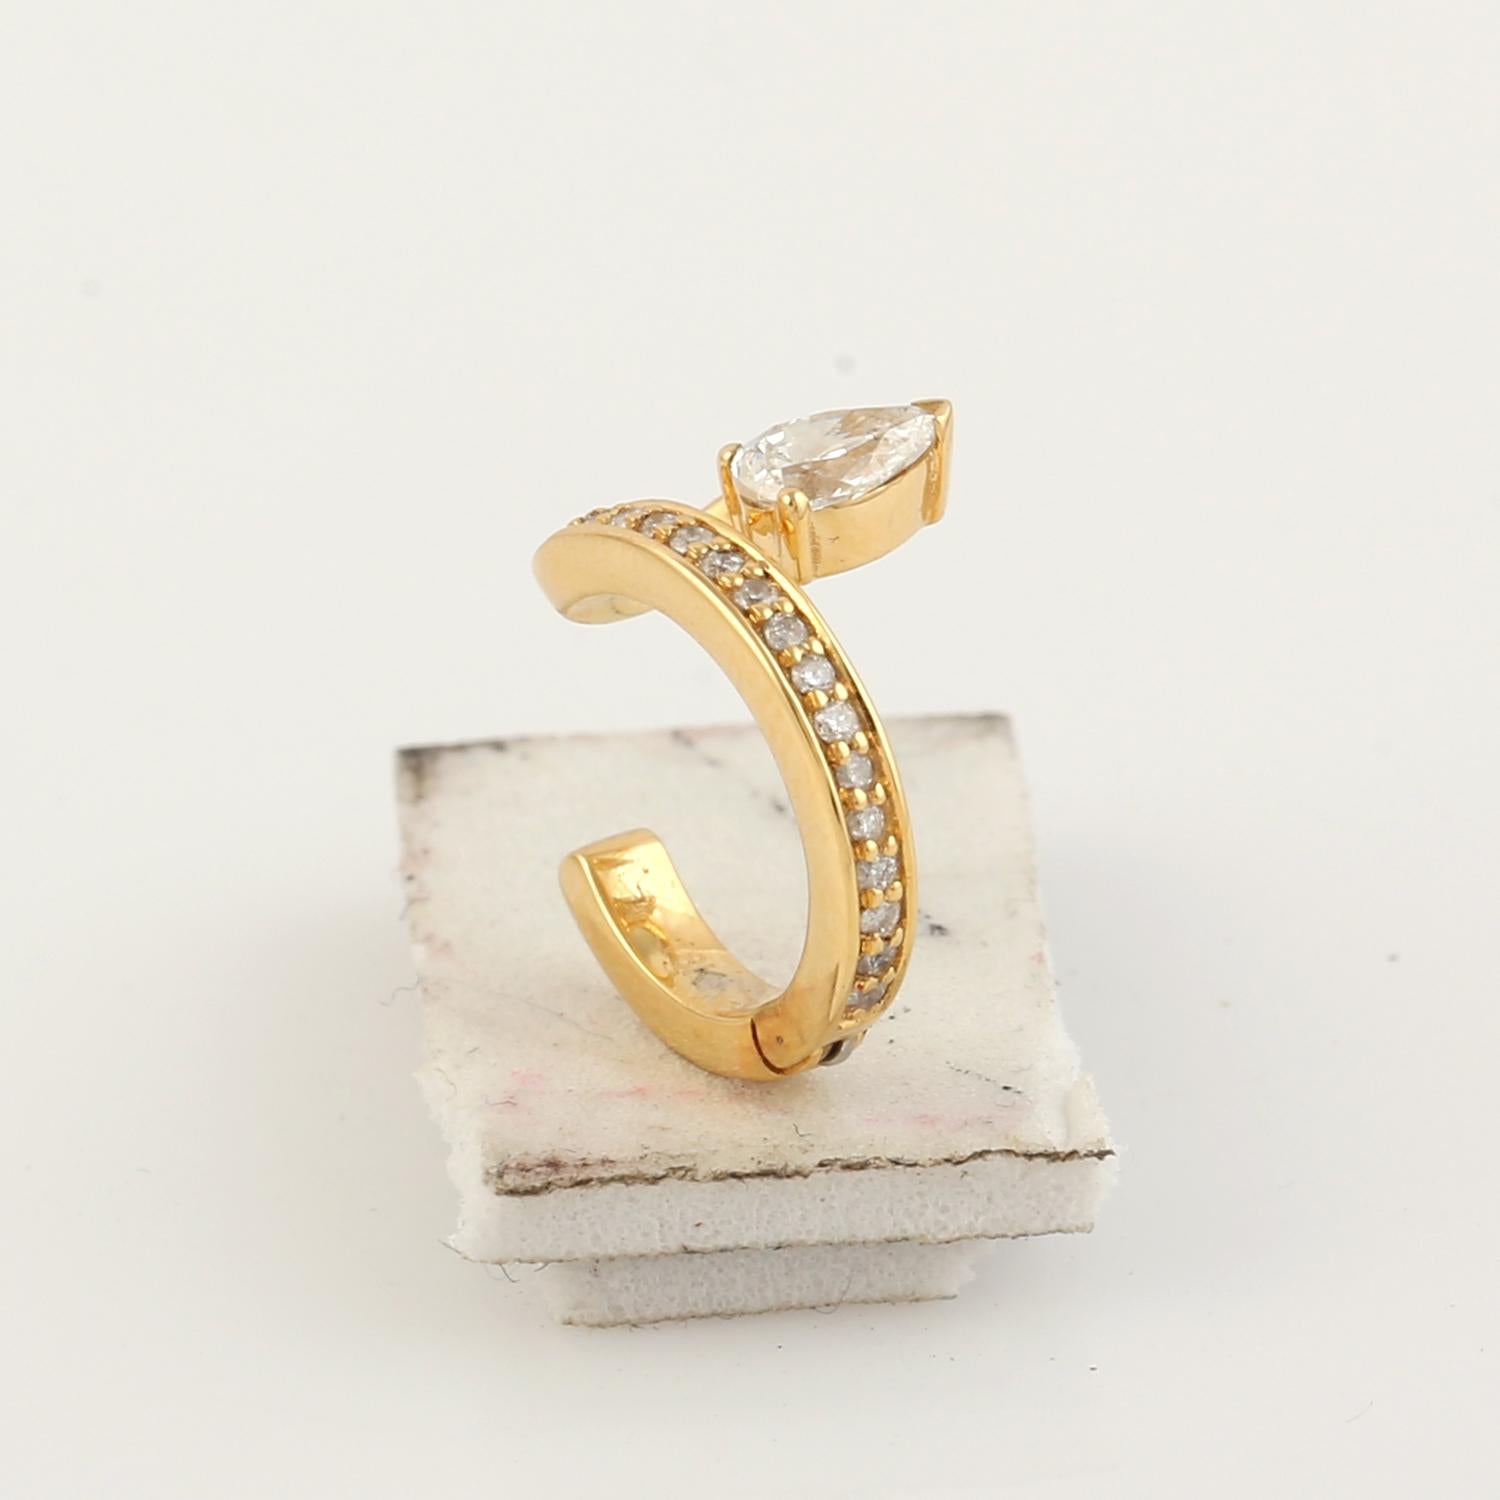 Mixed Cut Rose Cut Diamond Ear Cuff With Pave Diamonds Made In 18K Yellow Gold For Sale